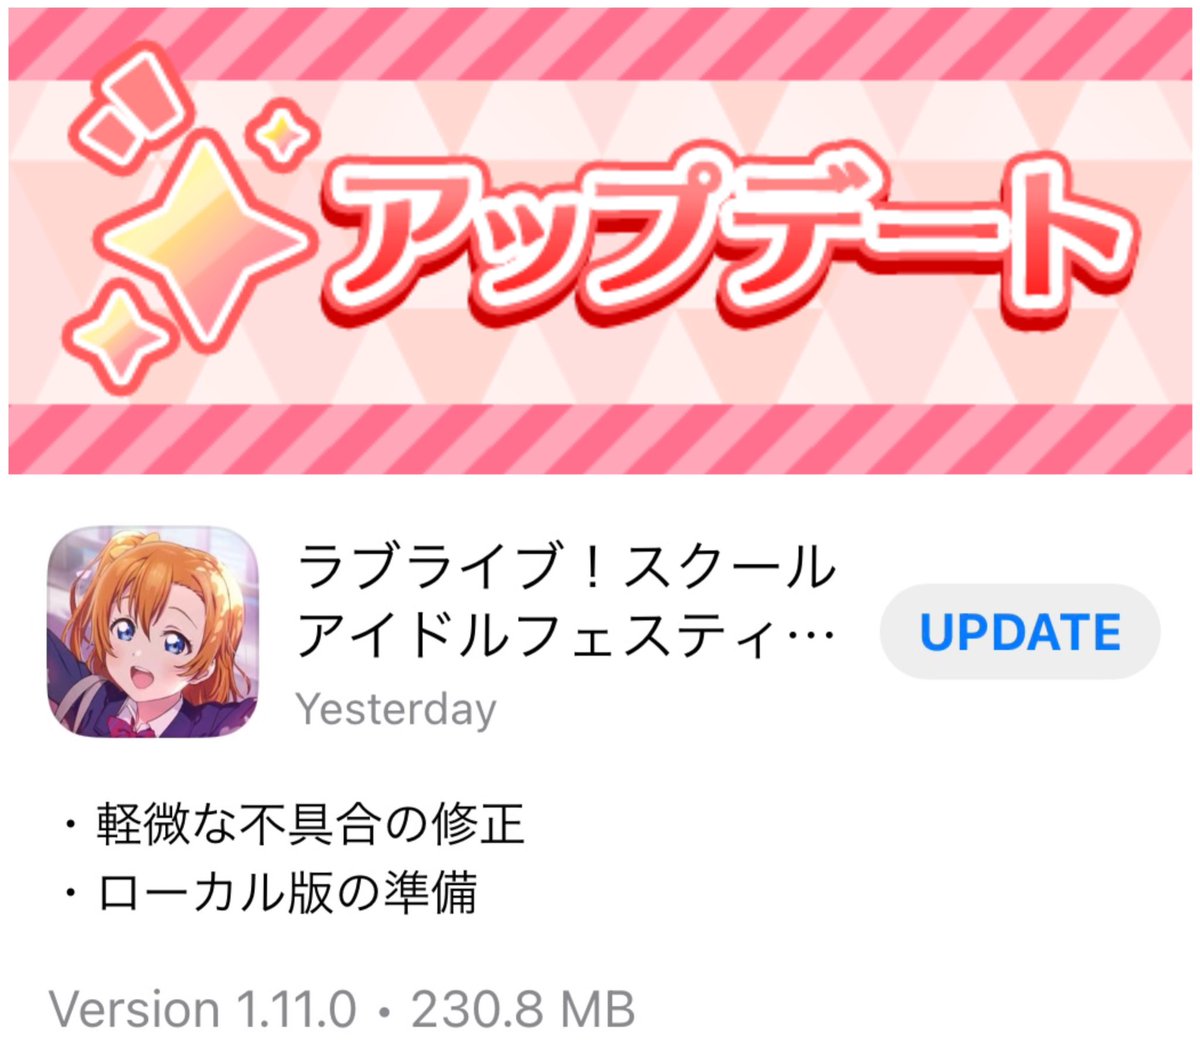 [🇯🇵#SIF2] 📢Offline Album Viewer📢 Version 1.11.0 is available to download! This update adds the offline local feature that will allow players to see their SIF2 titles and SIF2 card album. 🚨 However, it will NOT include cards transferred from SIF1. 🚨 #LoveLive #スクフェス2